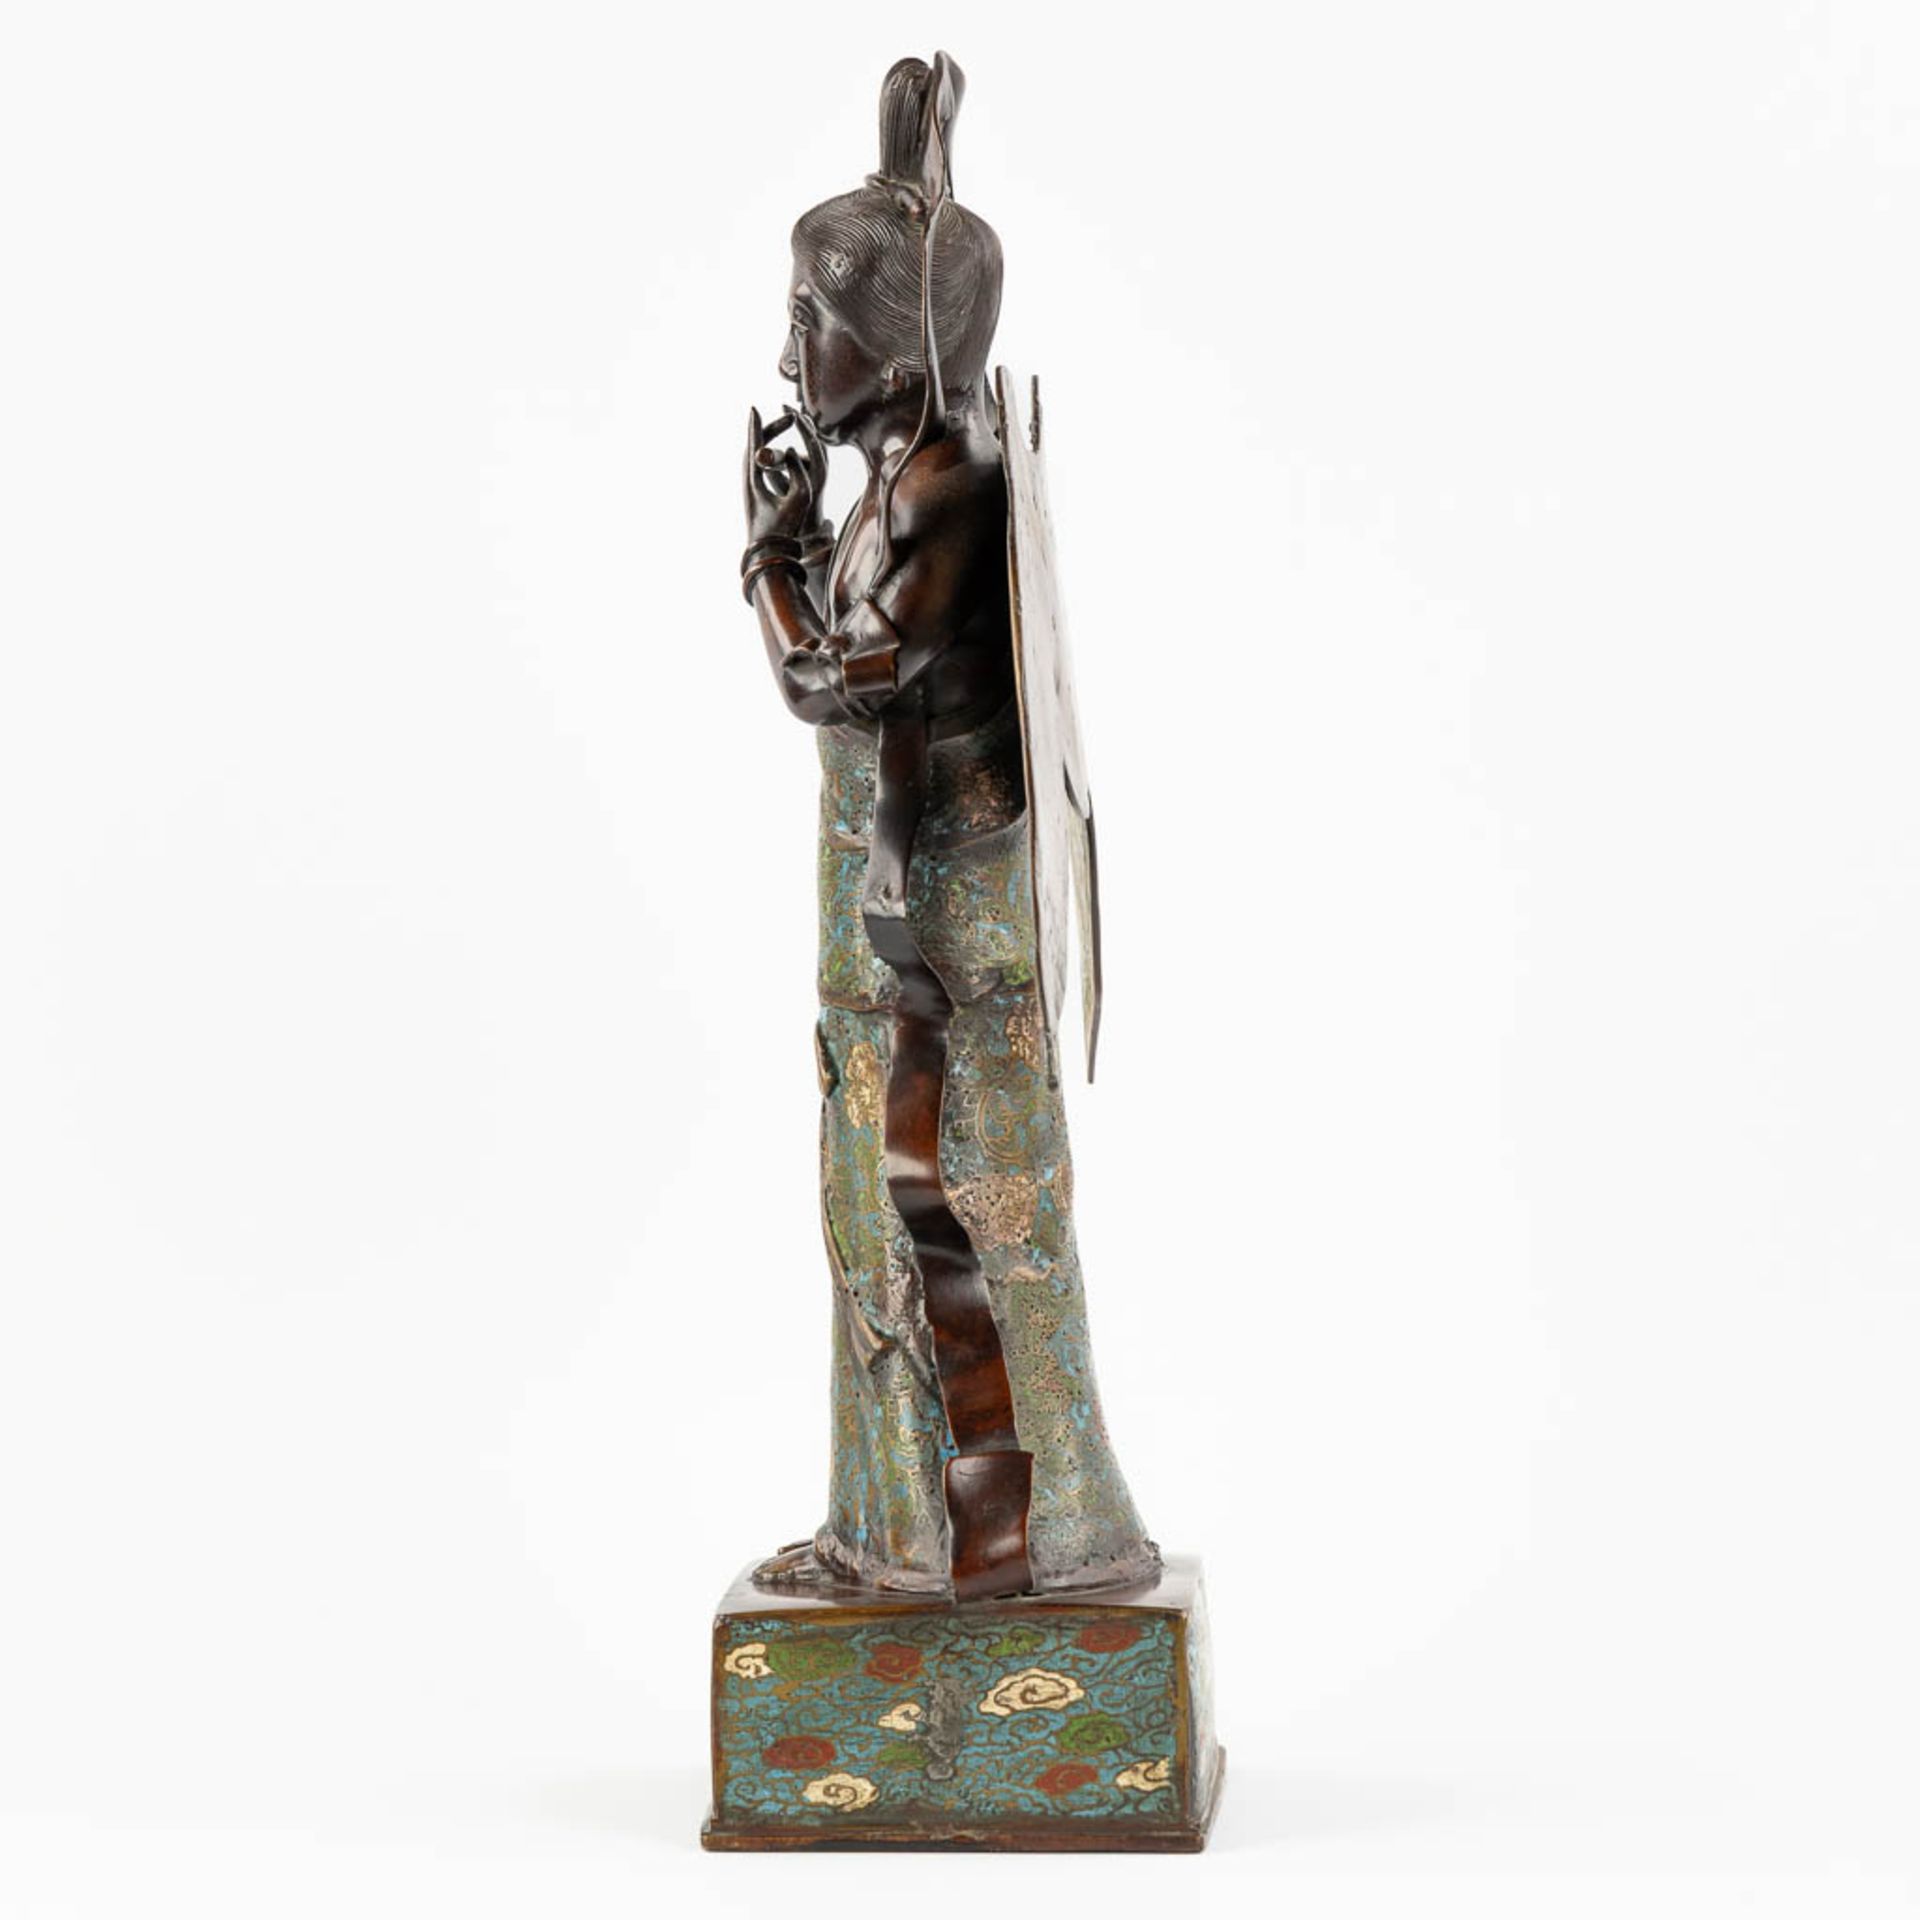 An Oriental figurine of an Angel with a flute, Champslevé bronze. (L:15 x W:35 x H:53 cm) - Image 6 of 14